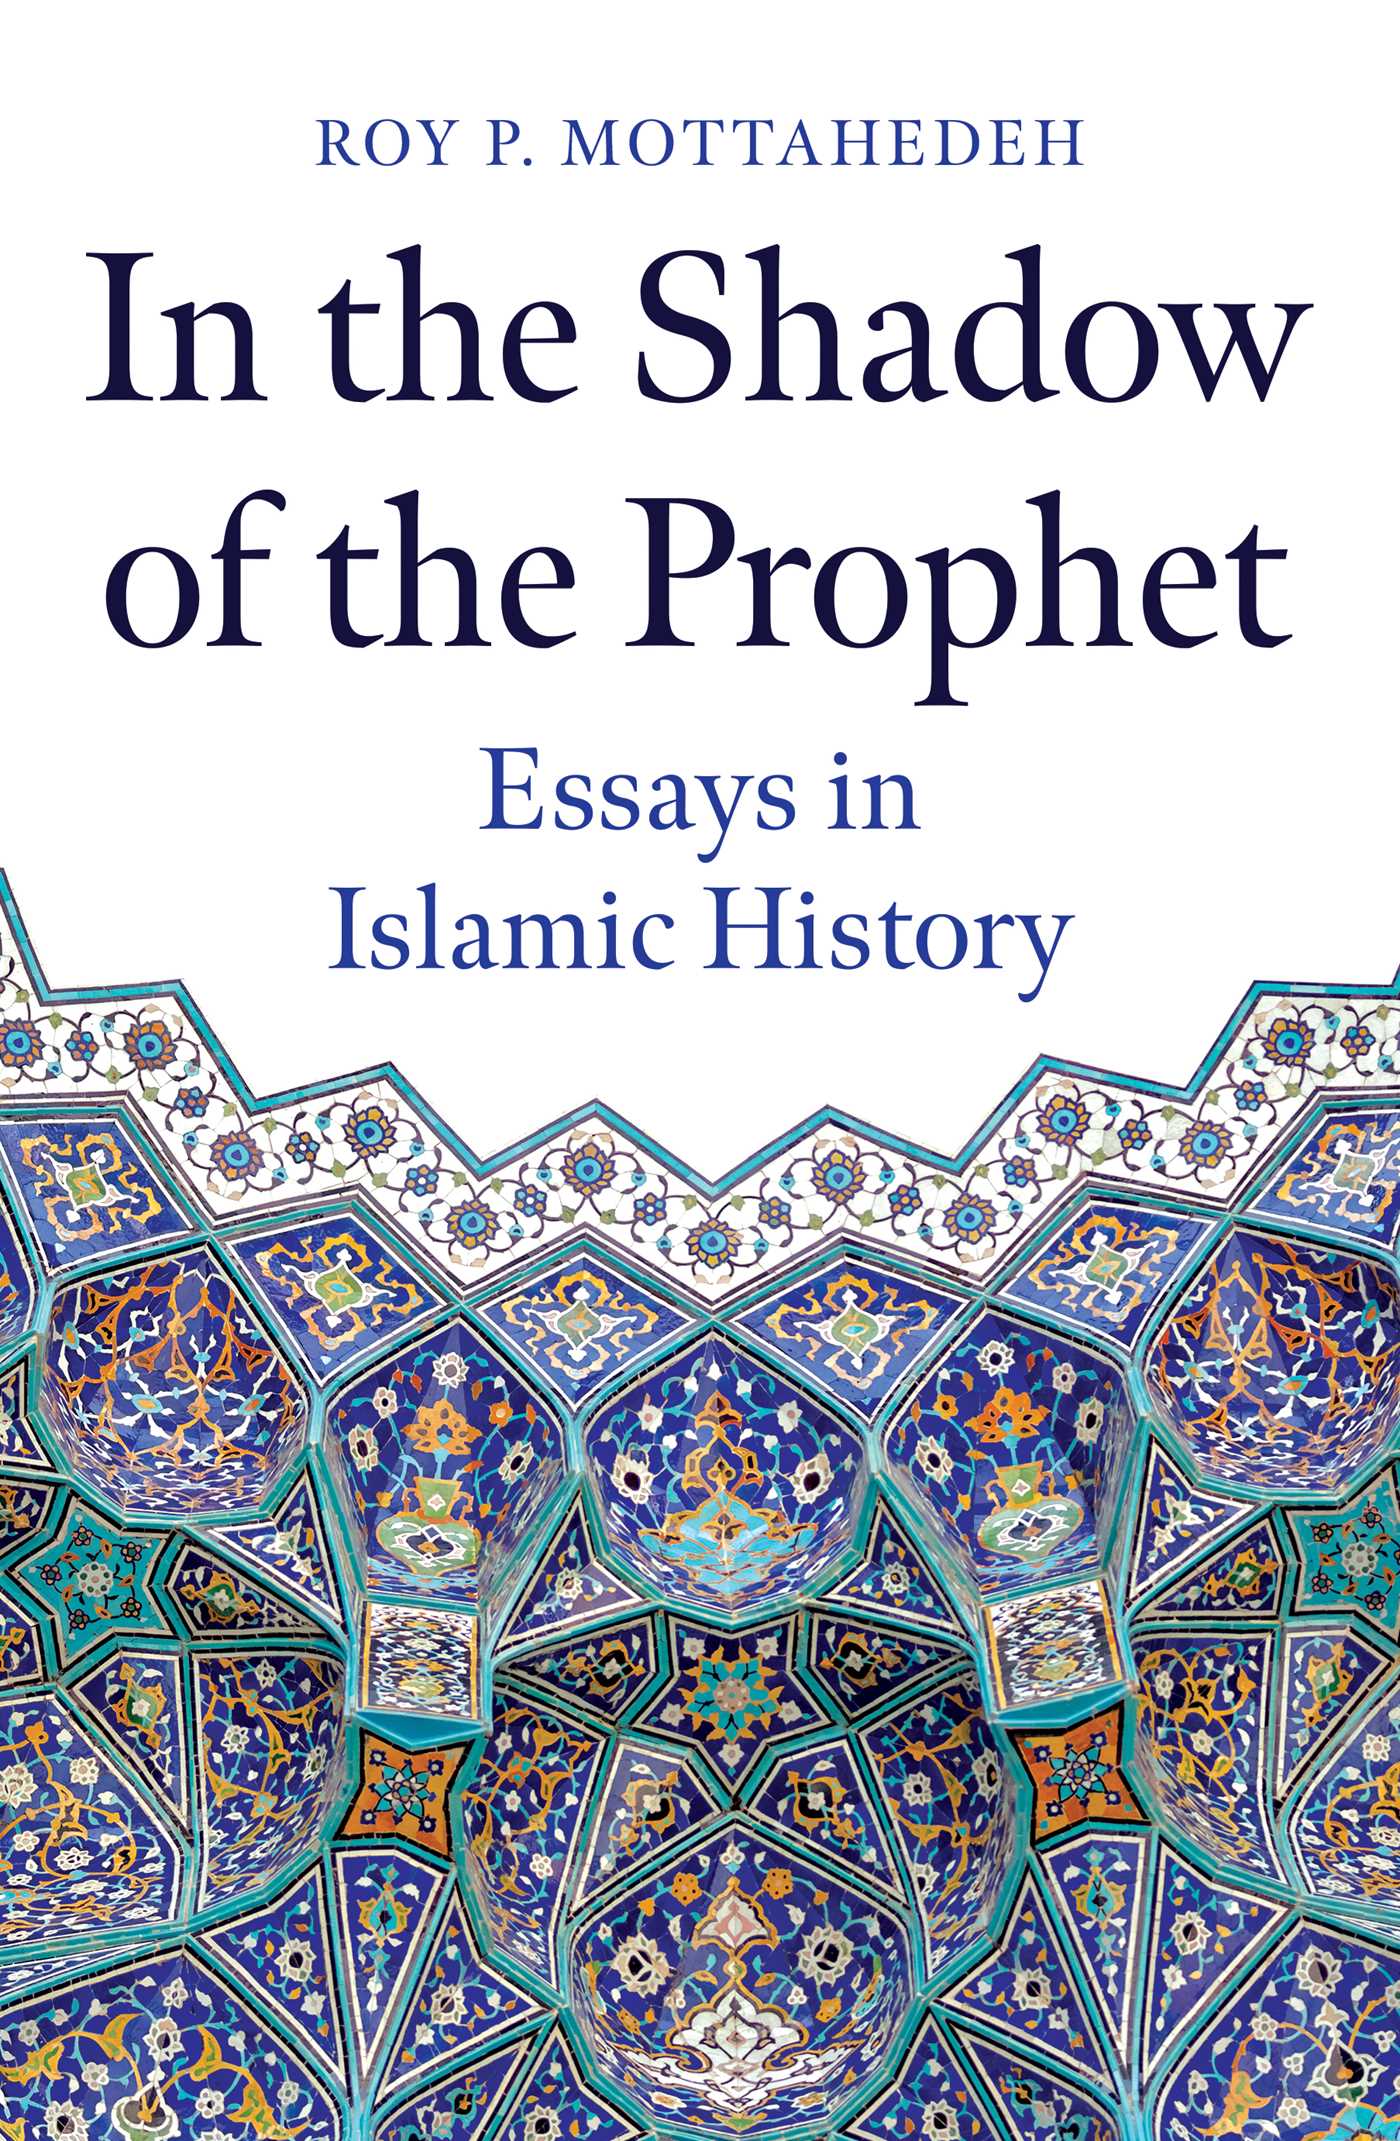 In the Shadow of the Prophet : Essays in Islamic History | Mottahedeh, Roy P.